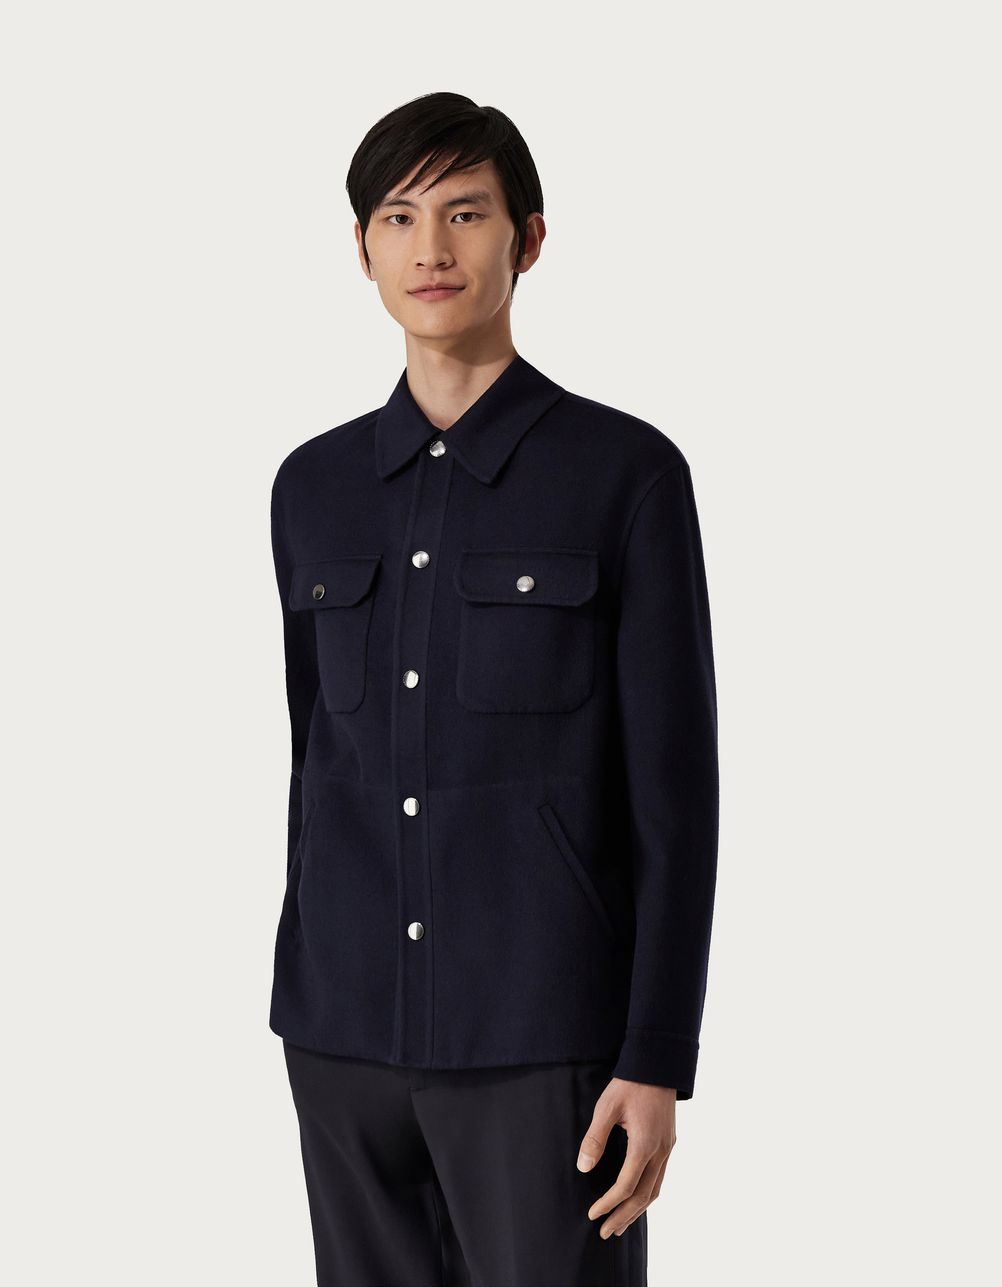 Reversible overshirt in black and blue Double wool